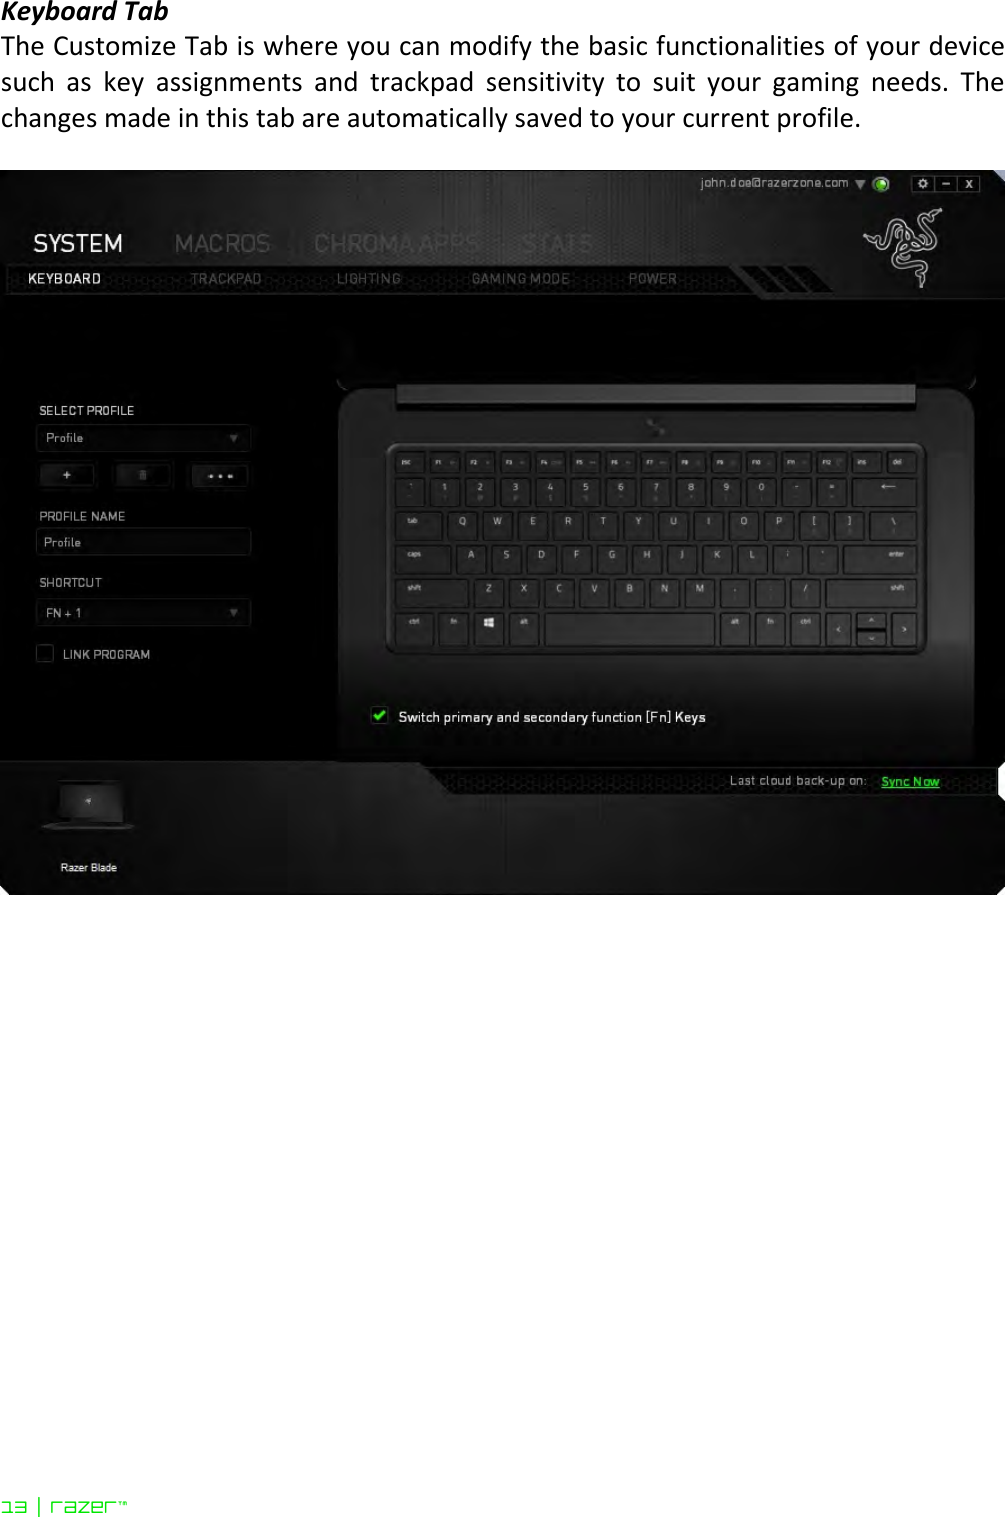 13 | razer™  Keyboard Tab The Customize Tab is where you can modify the basic functionalities of your device such  as  key  assignments  and  trackpad  sensitivity  to  suit  your  gaming  needs.  The changes made in this tab are automatically saved to your current profile.        